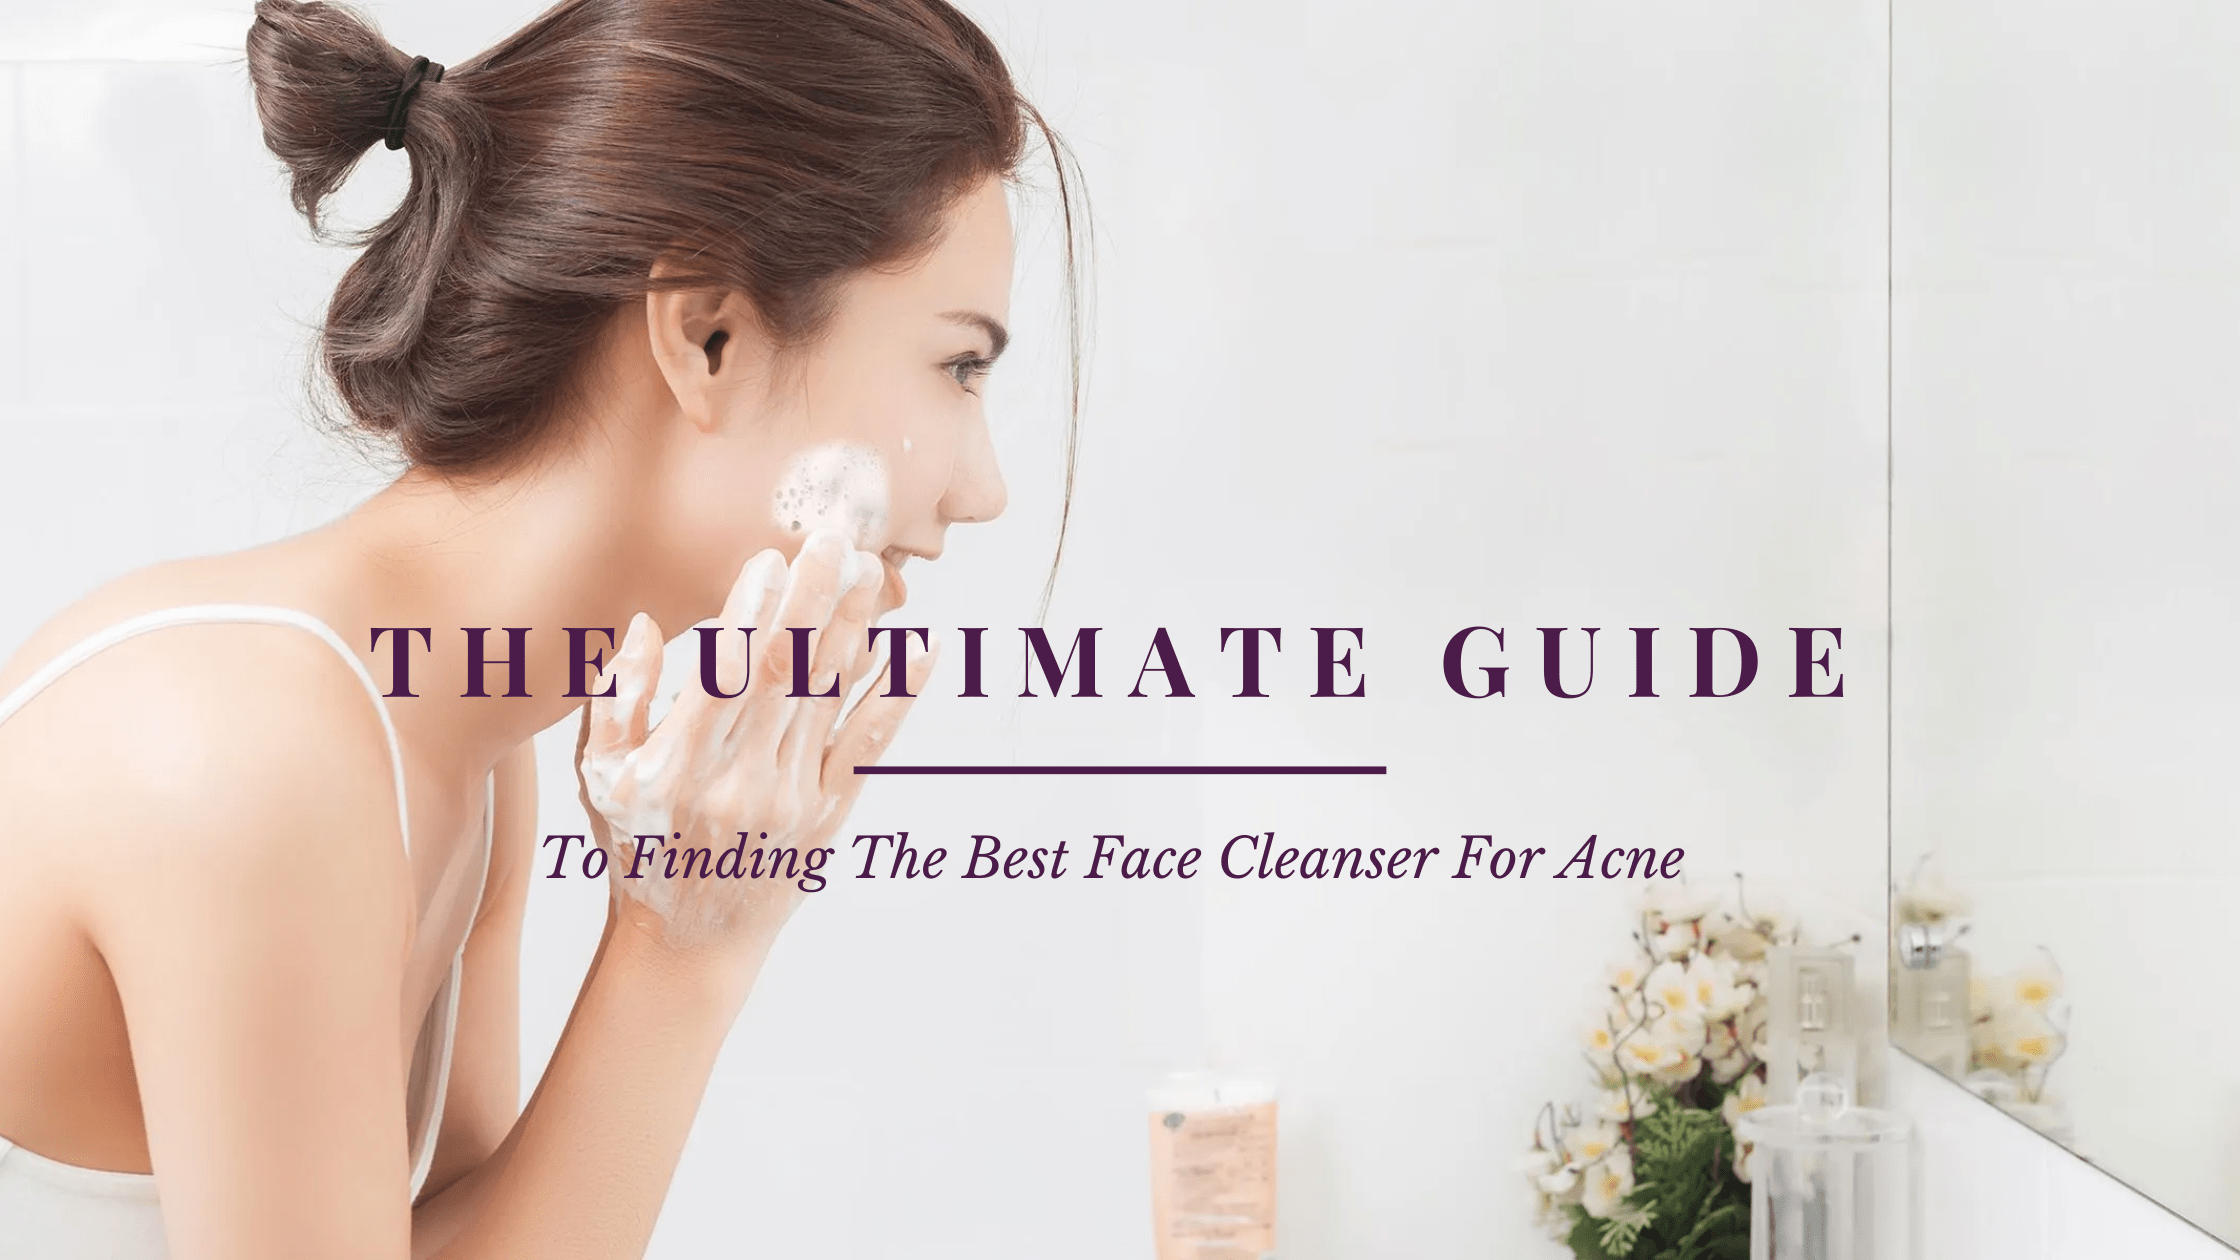 The Ultimate Guide to Finding the Best Face Cleanser for Acne